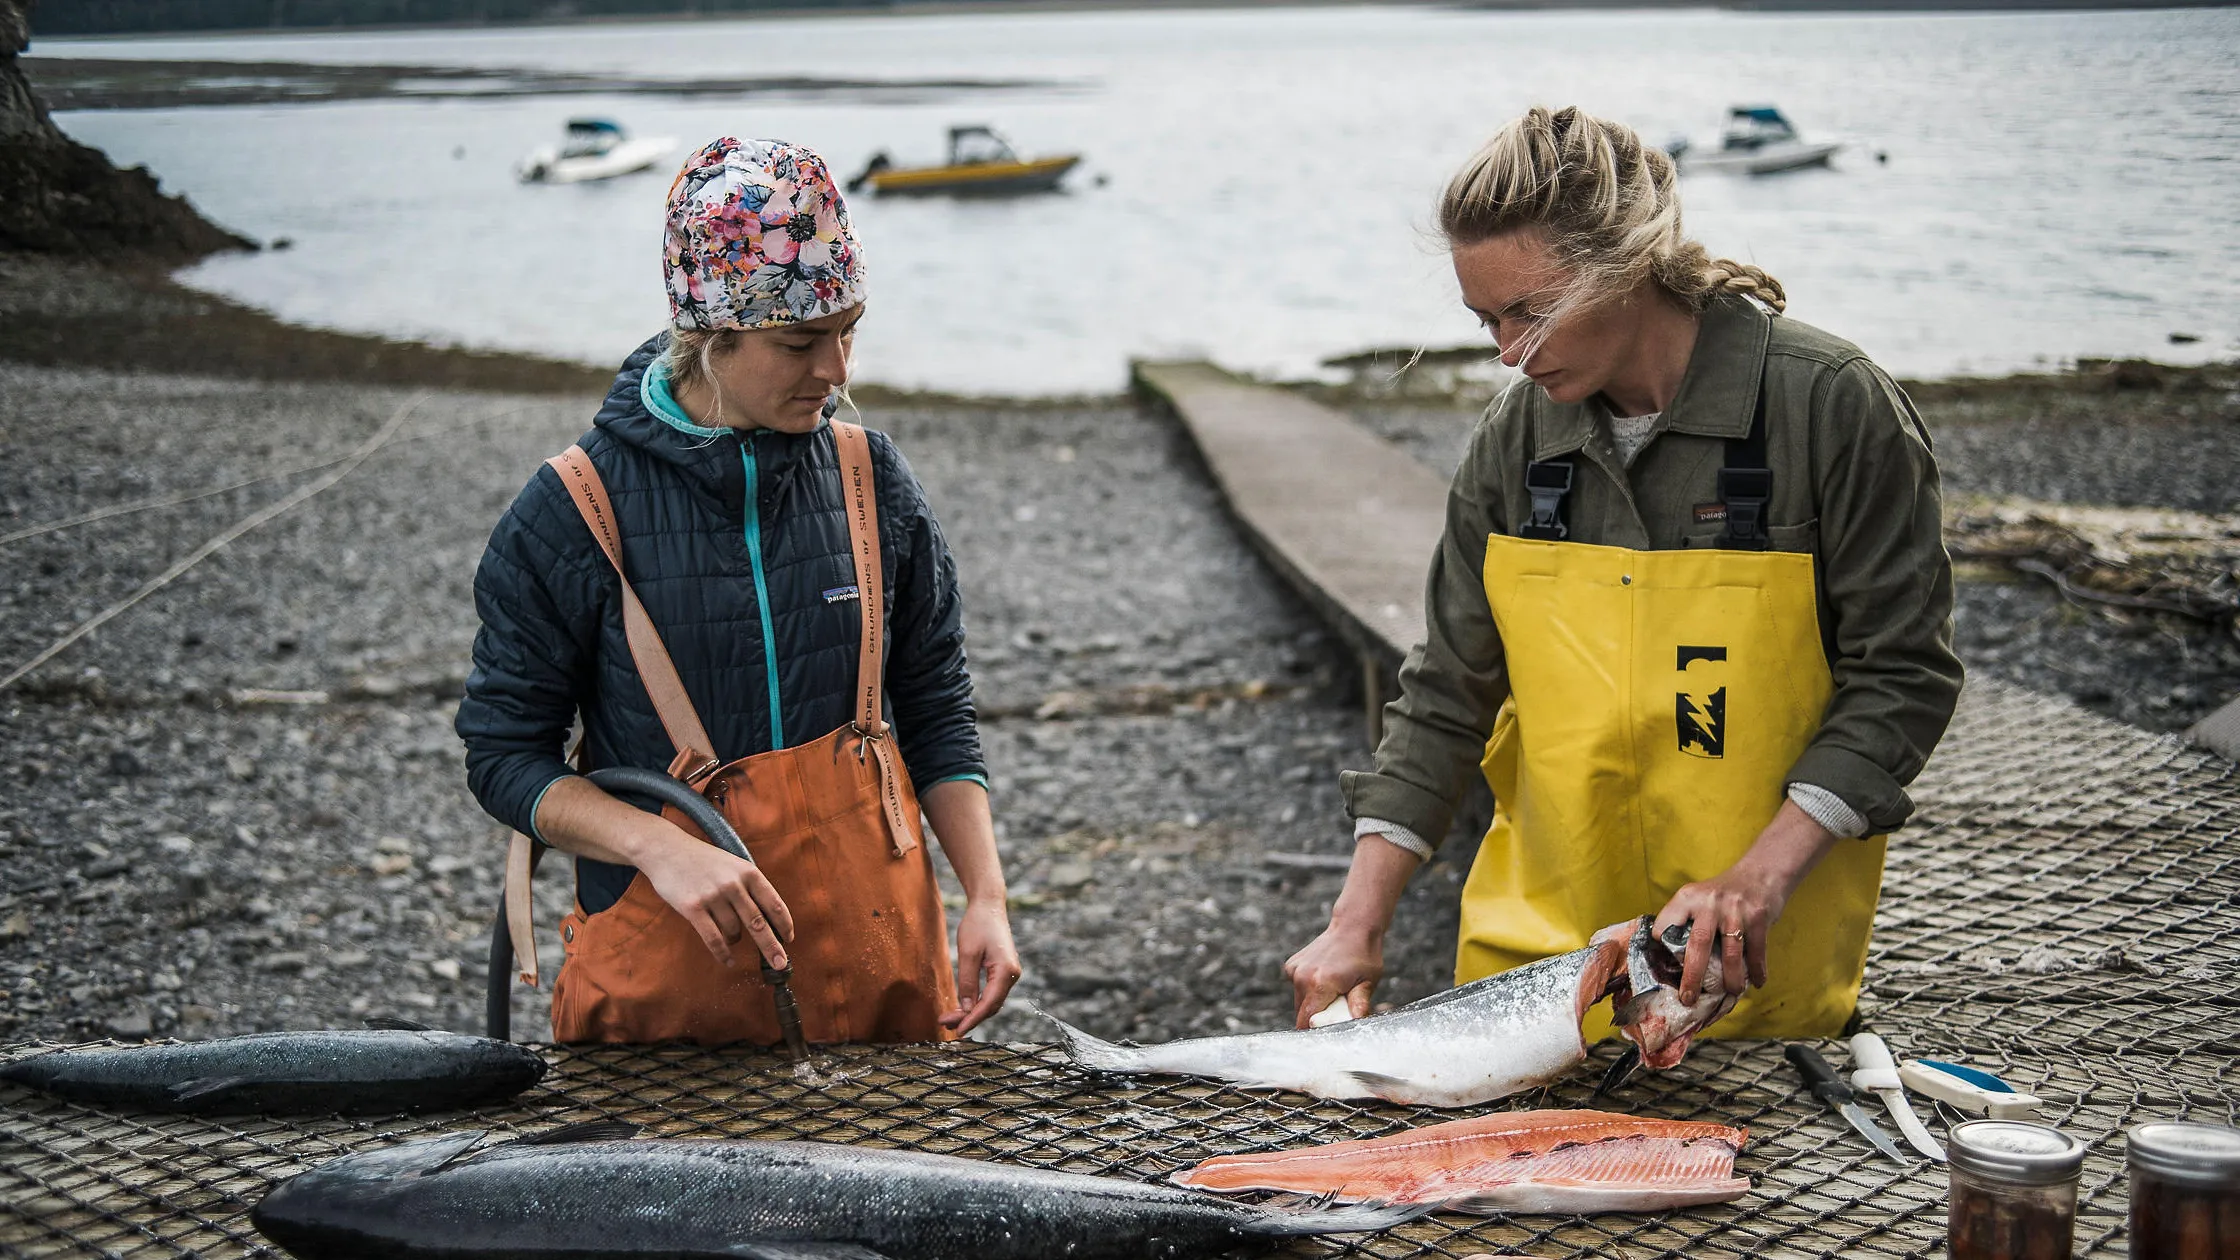 An image of the salmon sisters preparing a salmon, Courtesy Salmon Sisters